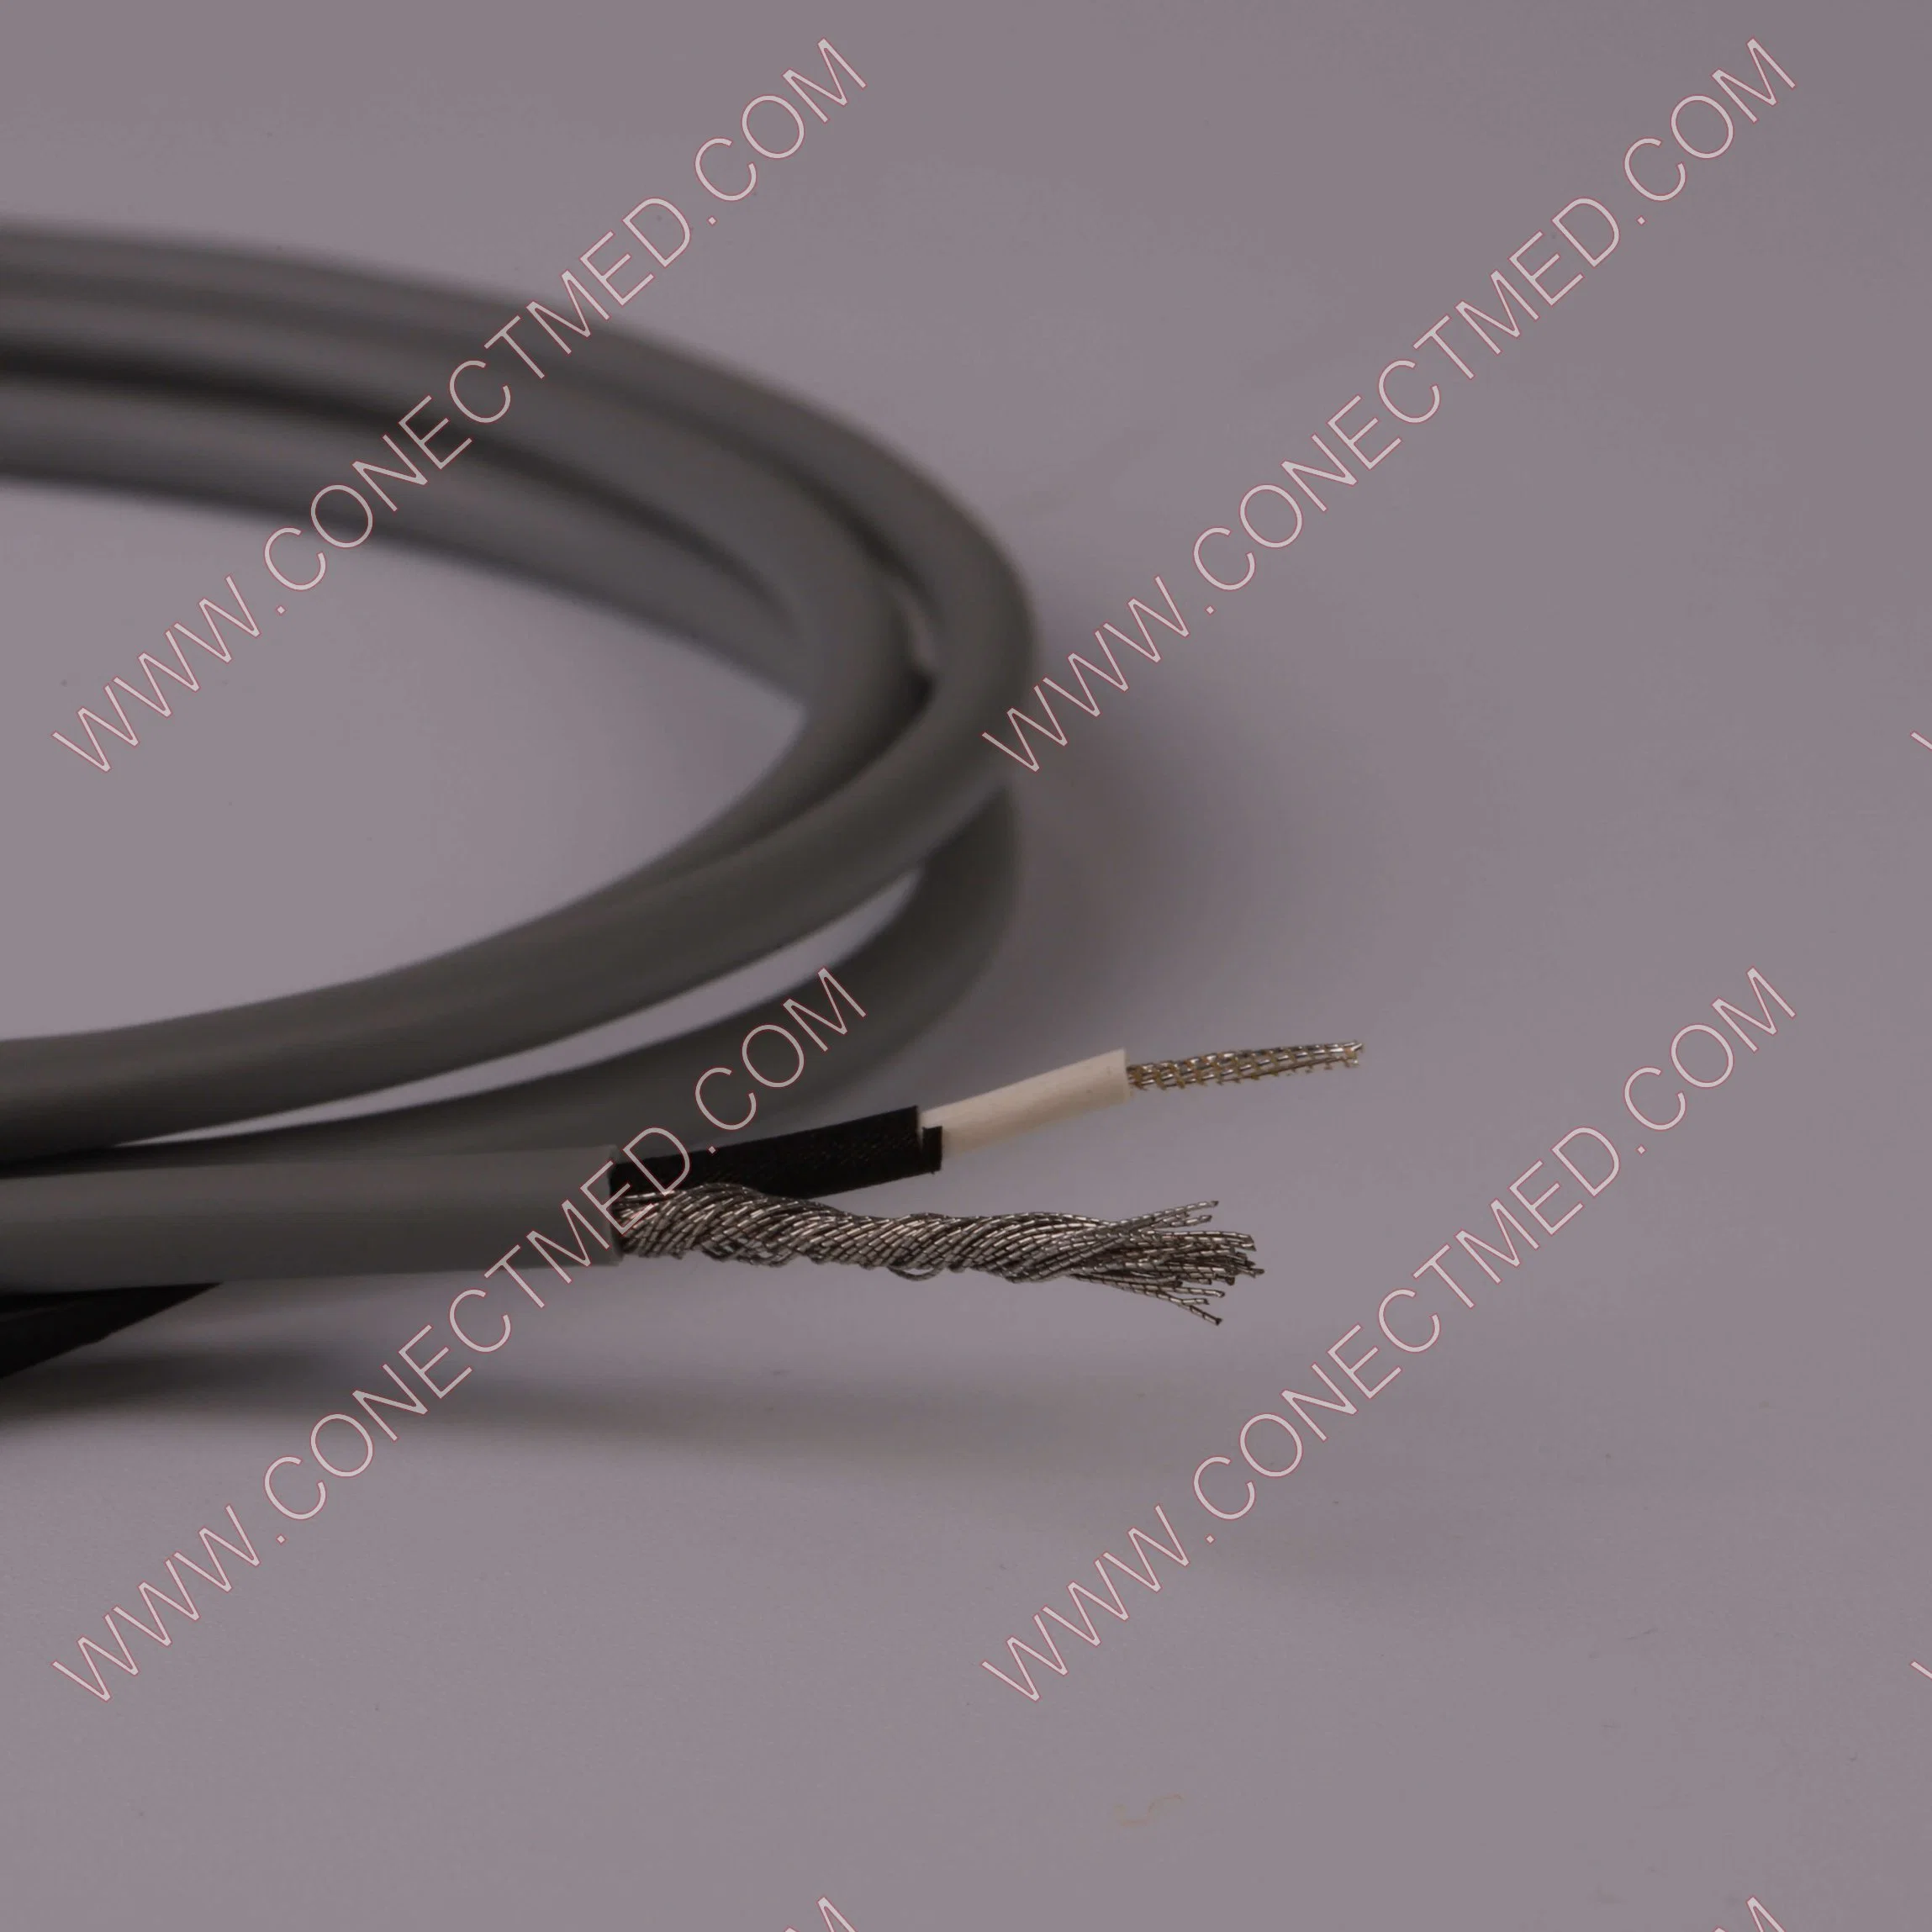 Thomas Higher Grade TPU Shielded Cable Single Stranded ECG Lead Wire ECG Cable